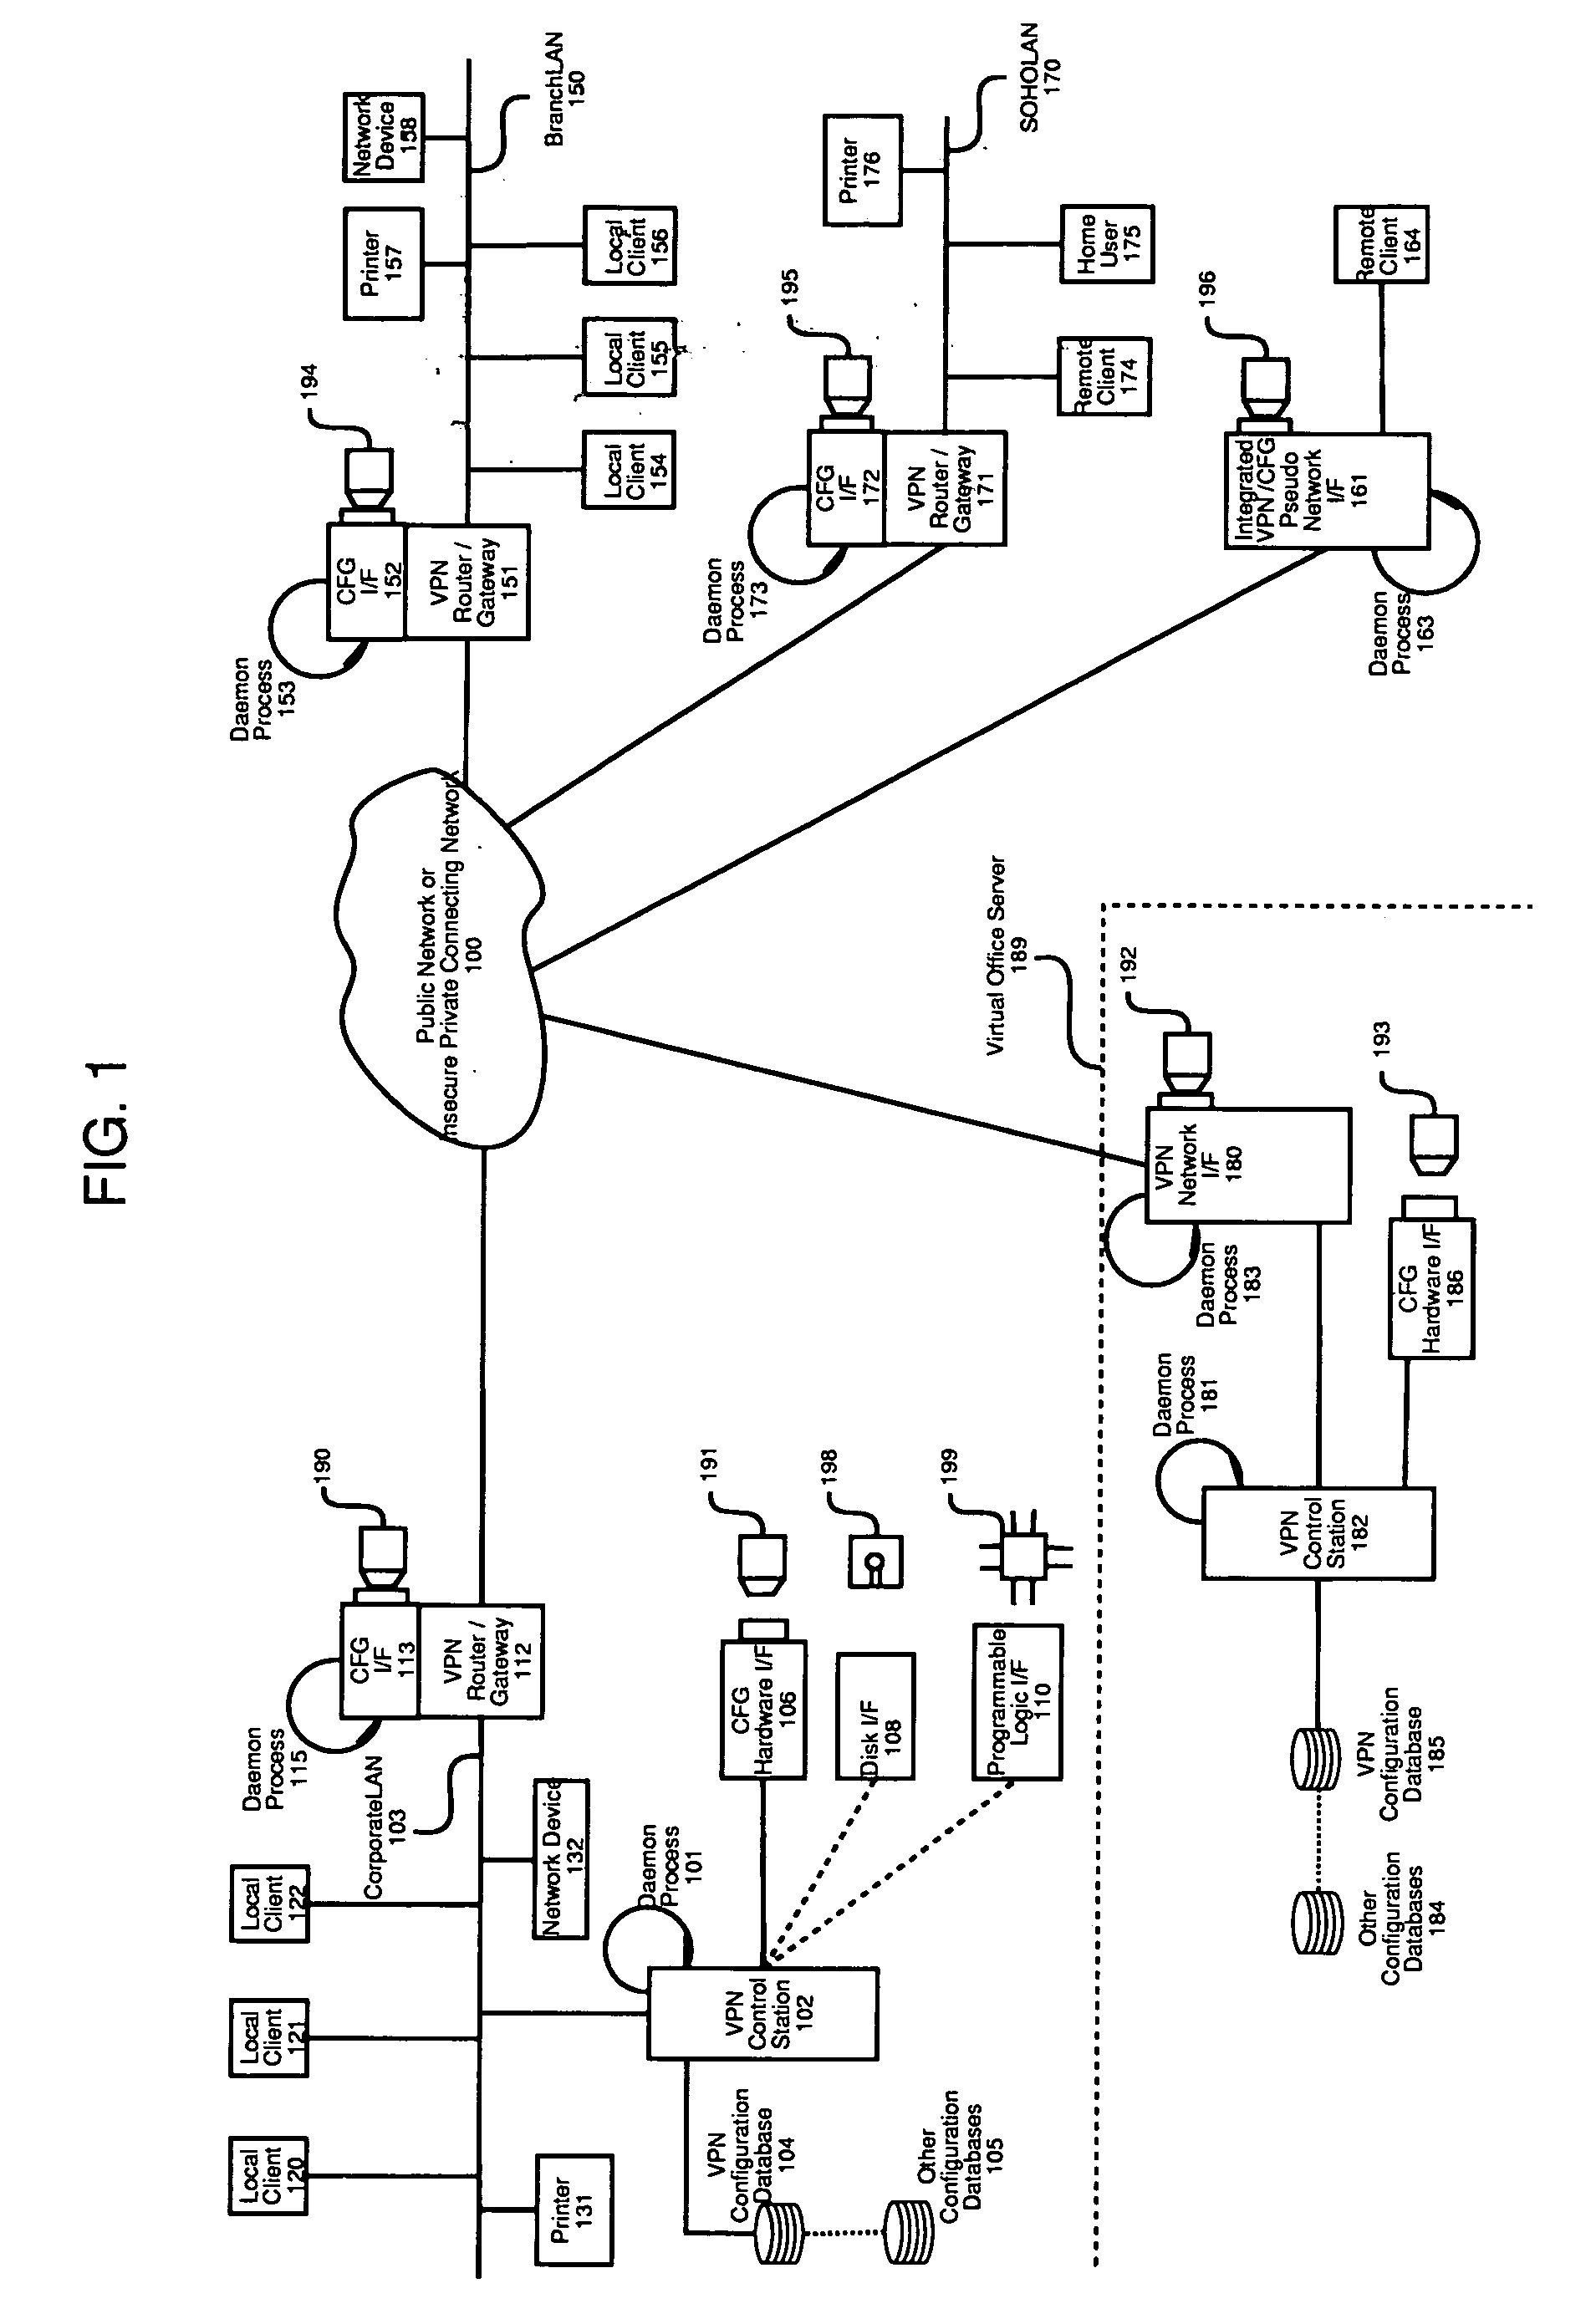 Method and apparatus for automatic configuration and management of a virtual private network